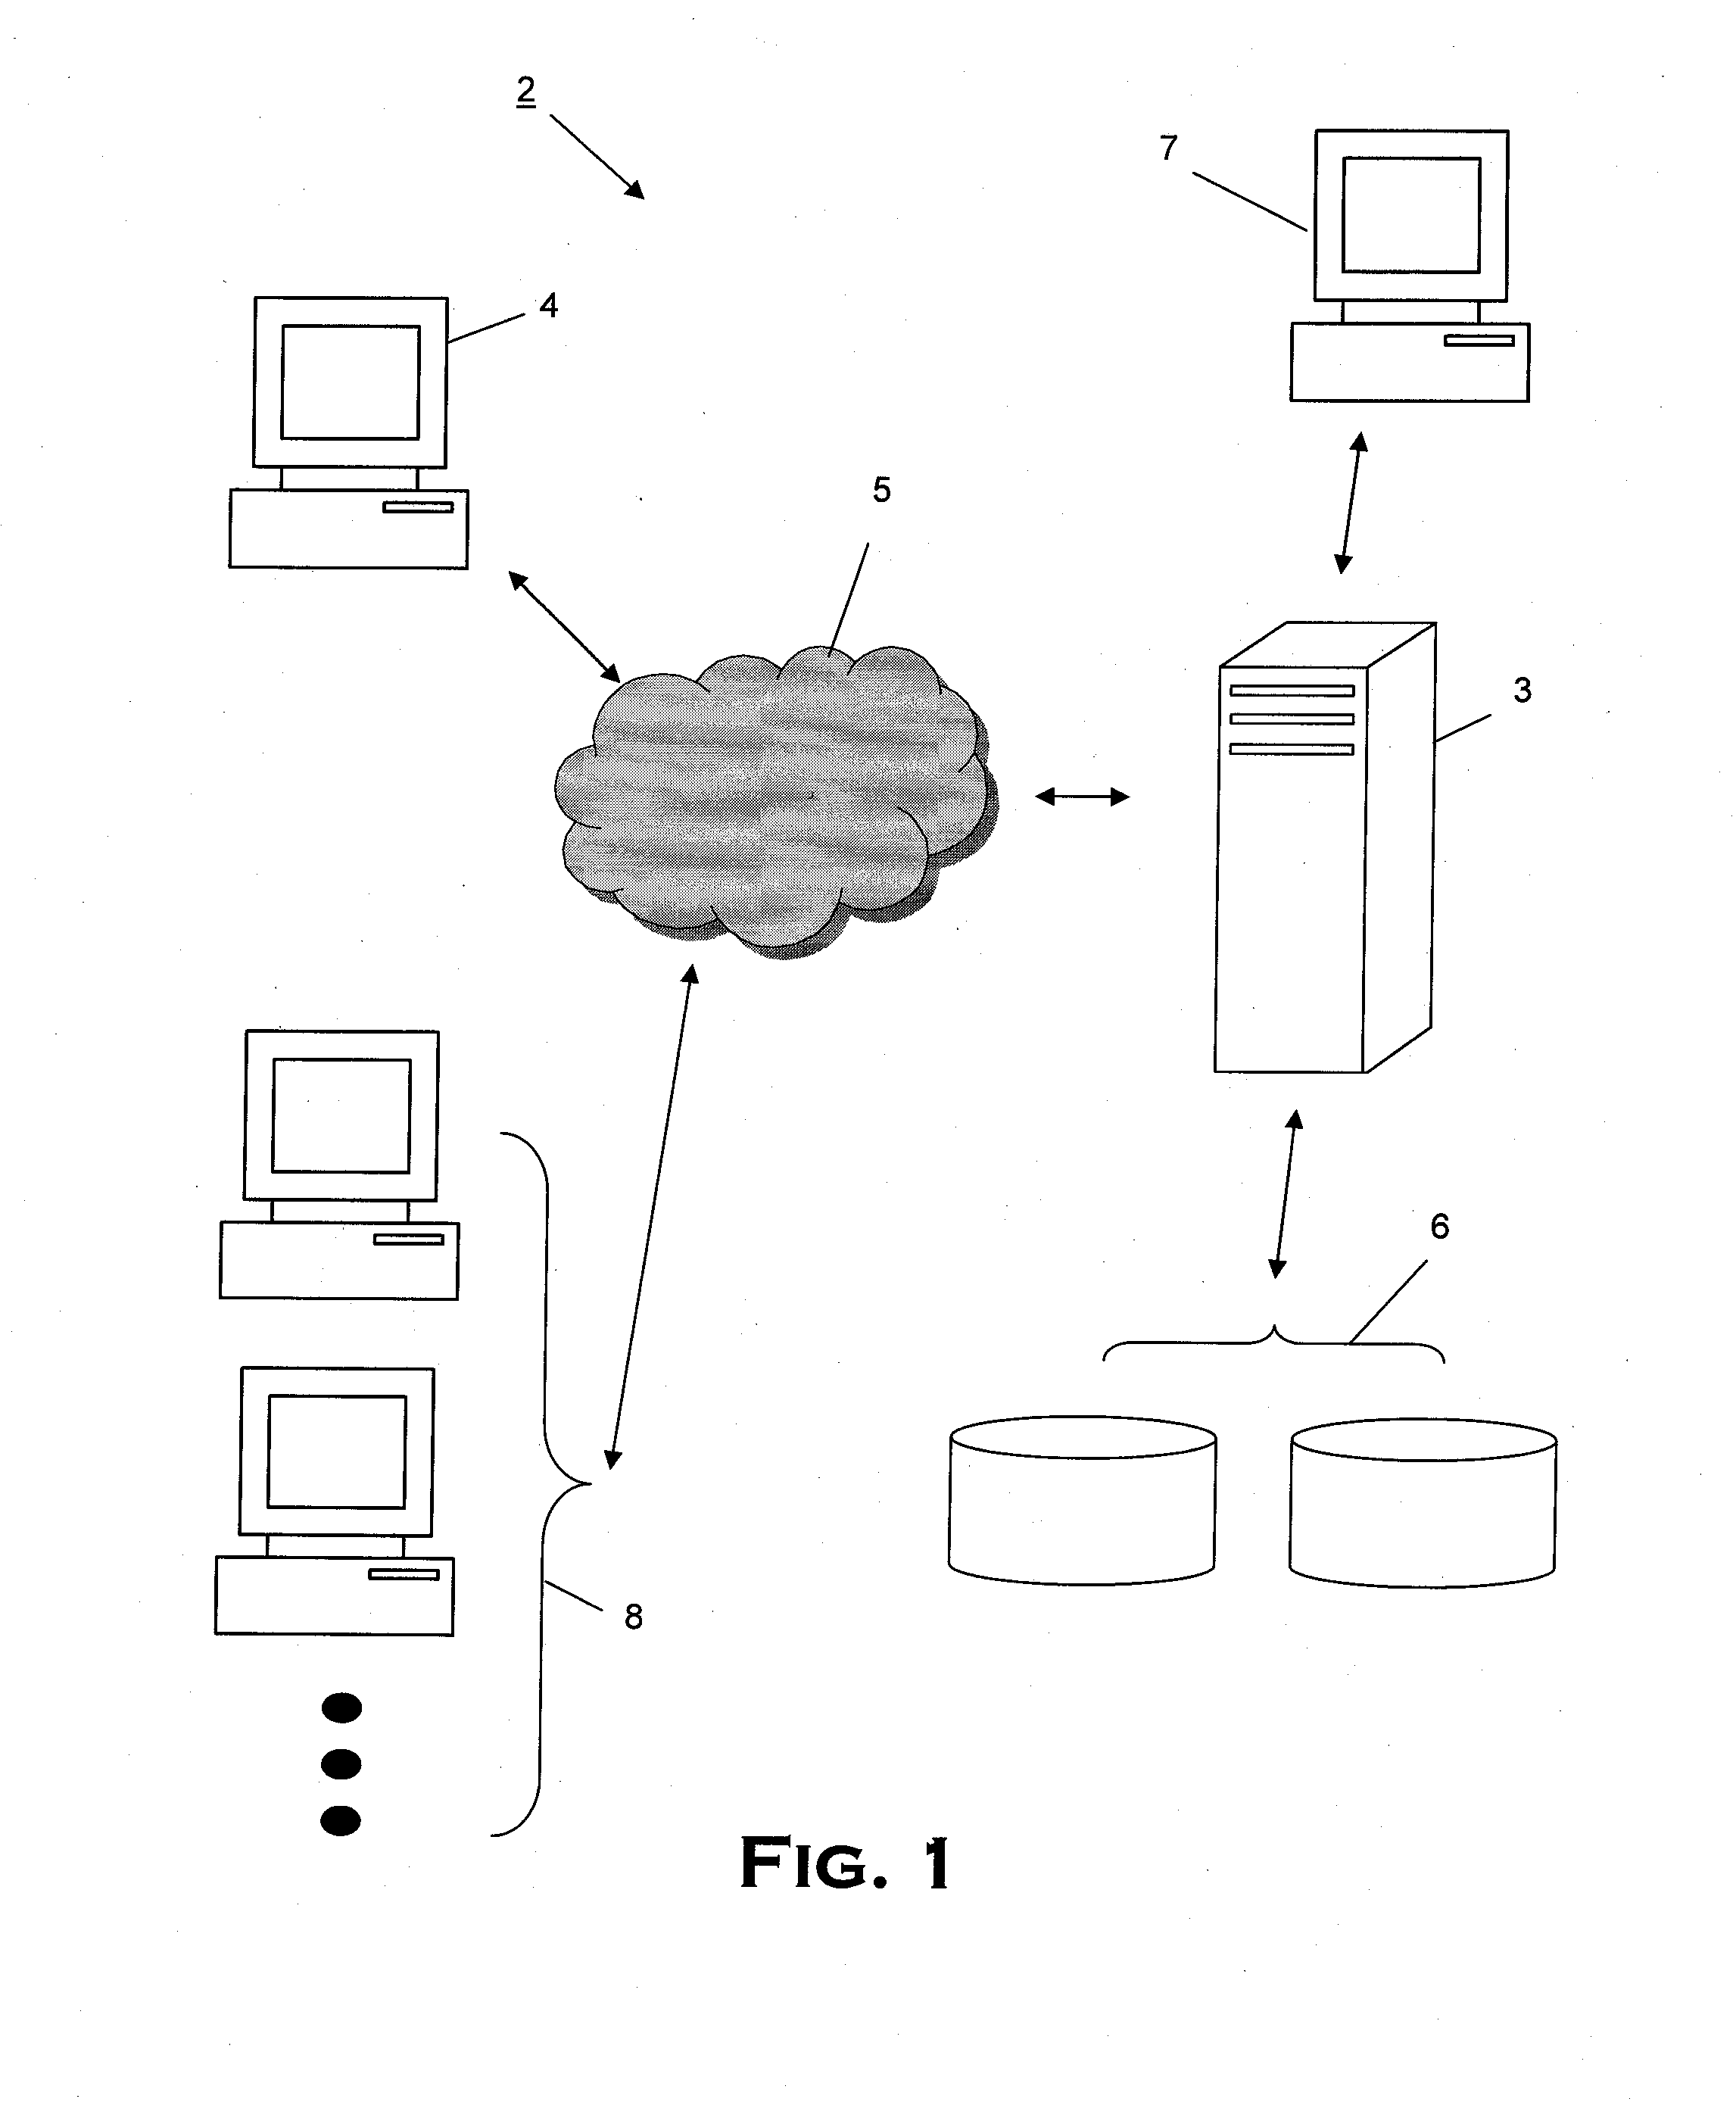 System for storing, displaying, and navigating content data regarding market driven industries